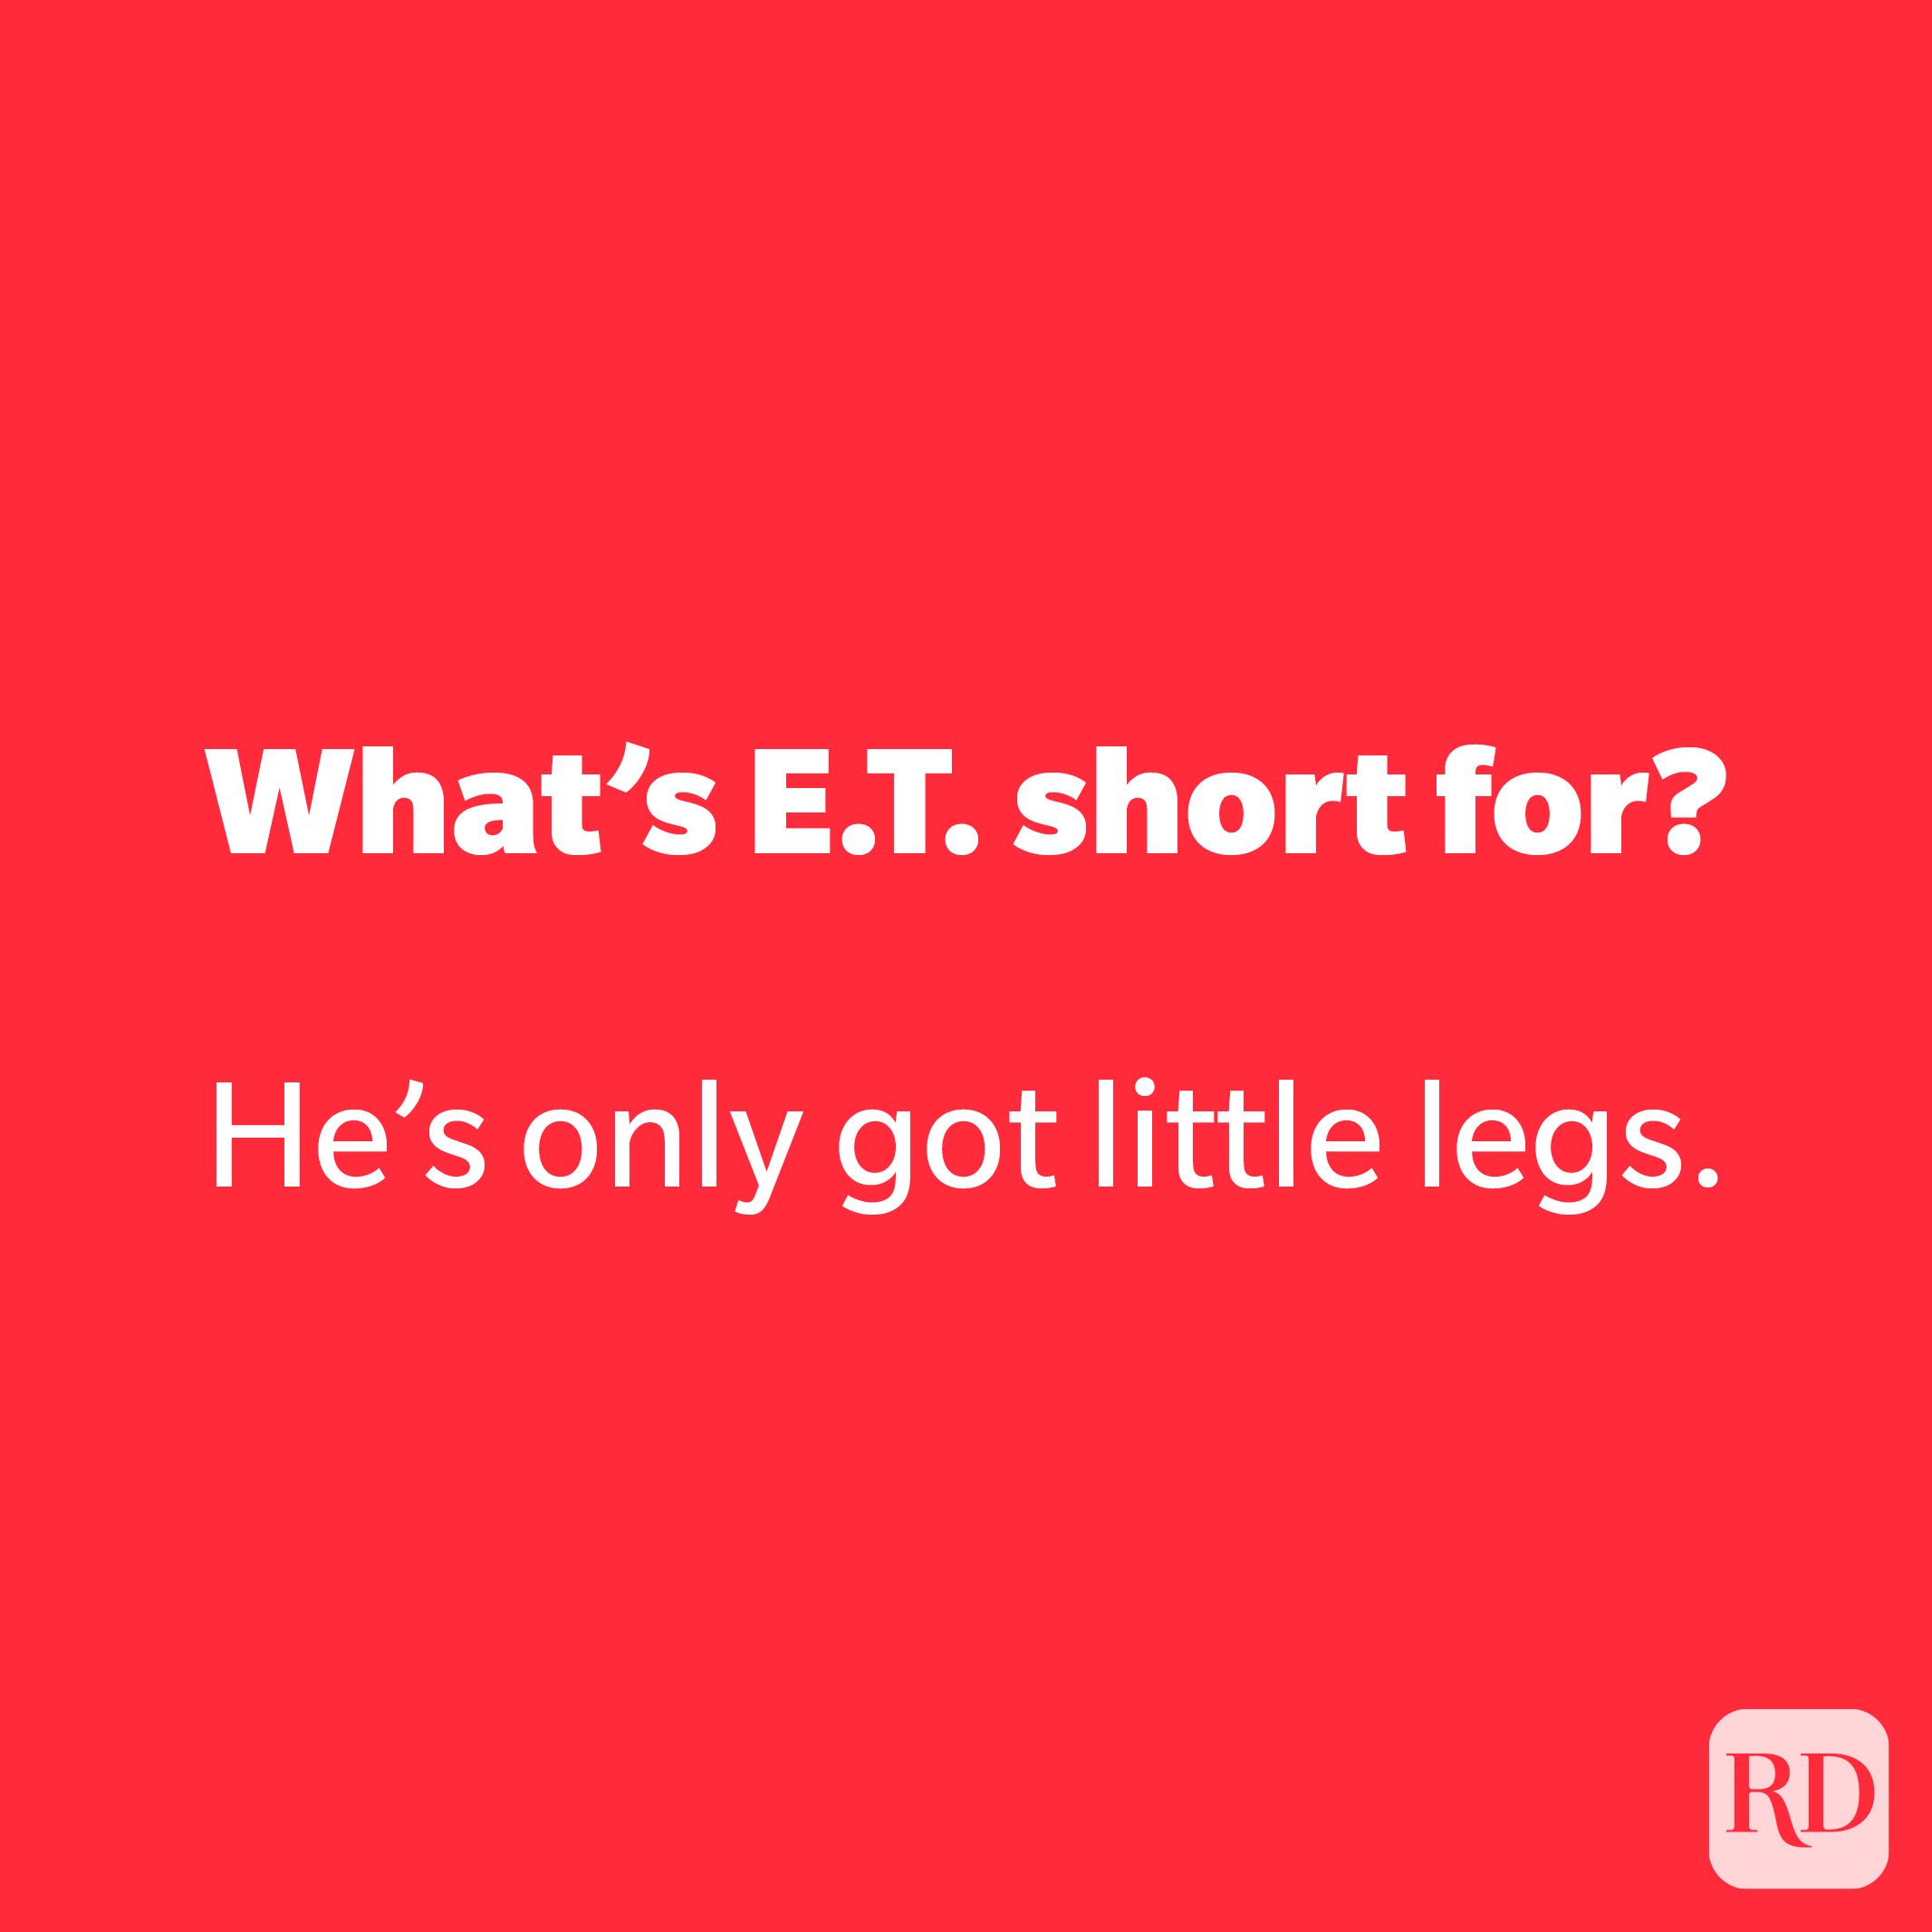 What’s E.T. short for?